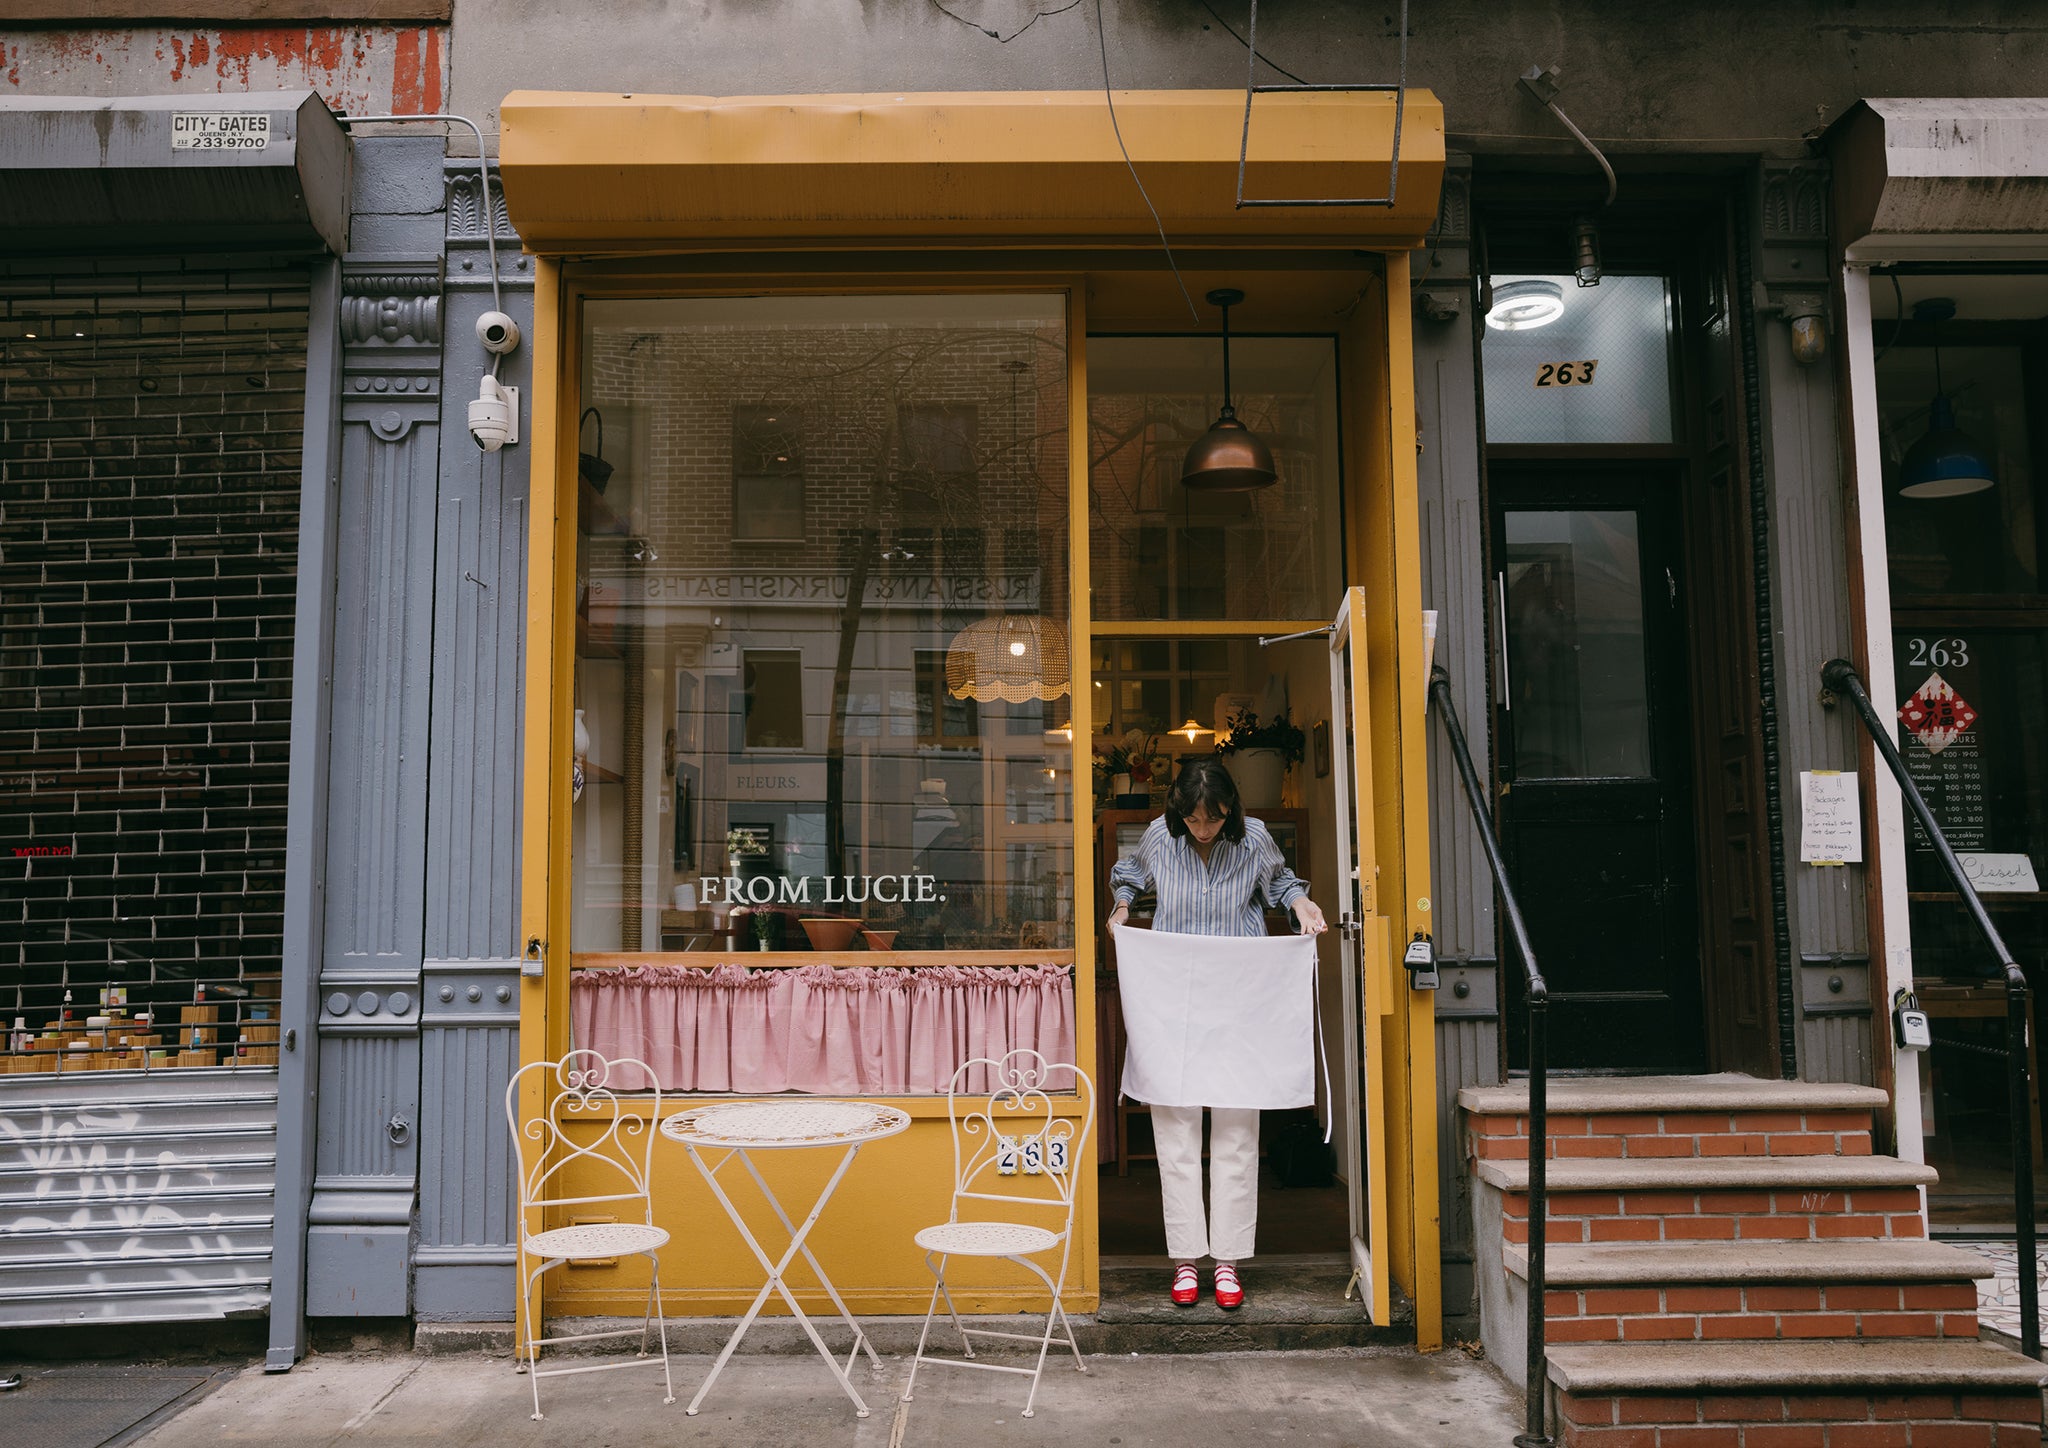 Street view of the front of a yellow bakery.